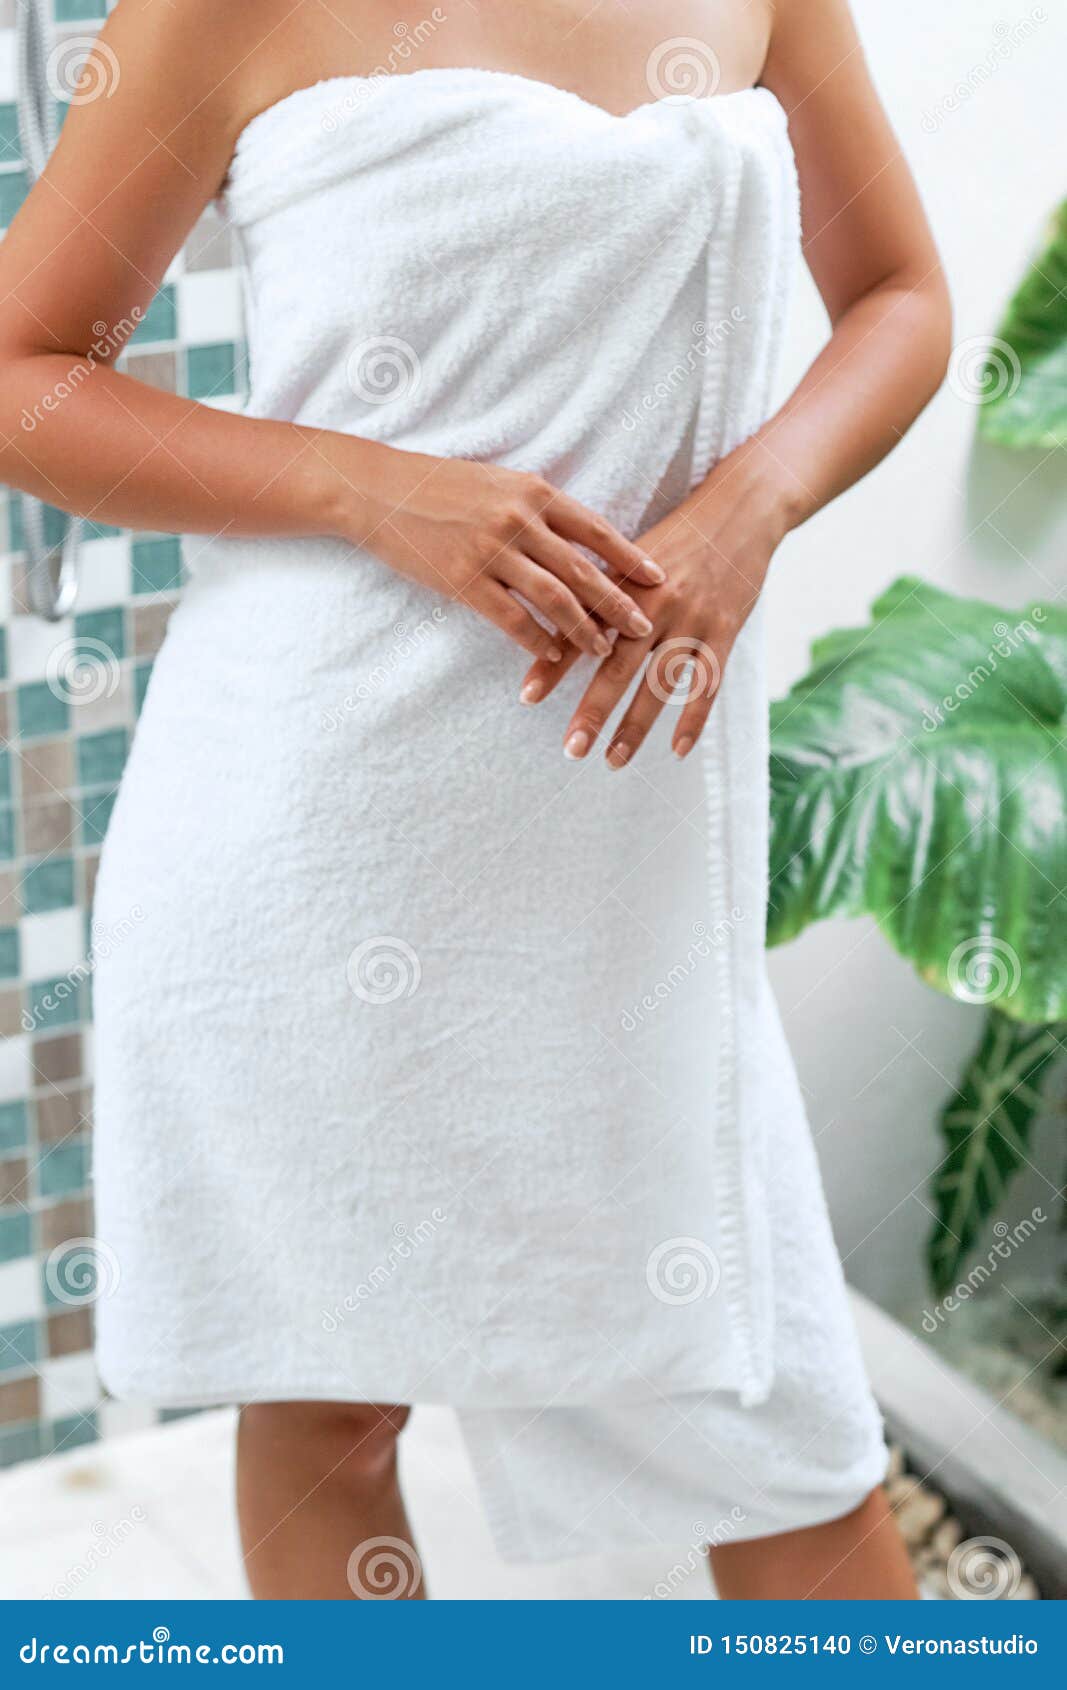 A Woman in a Bath with Towel. Girl Shows Hands in Form Heart